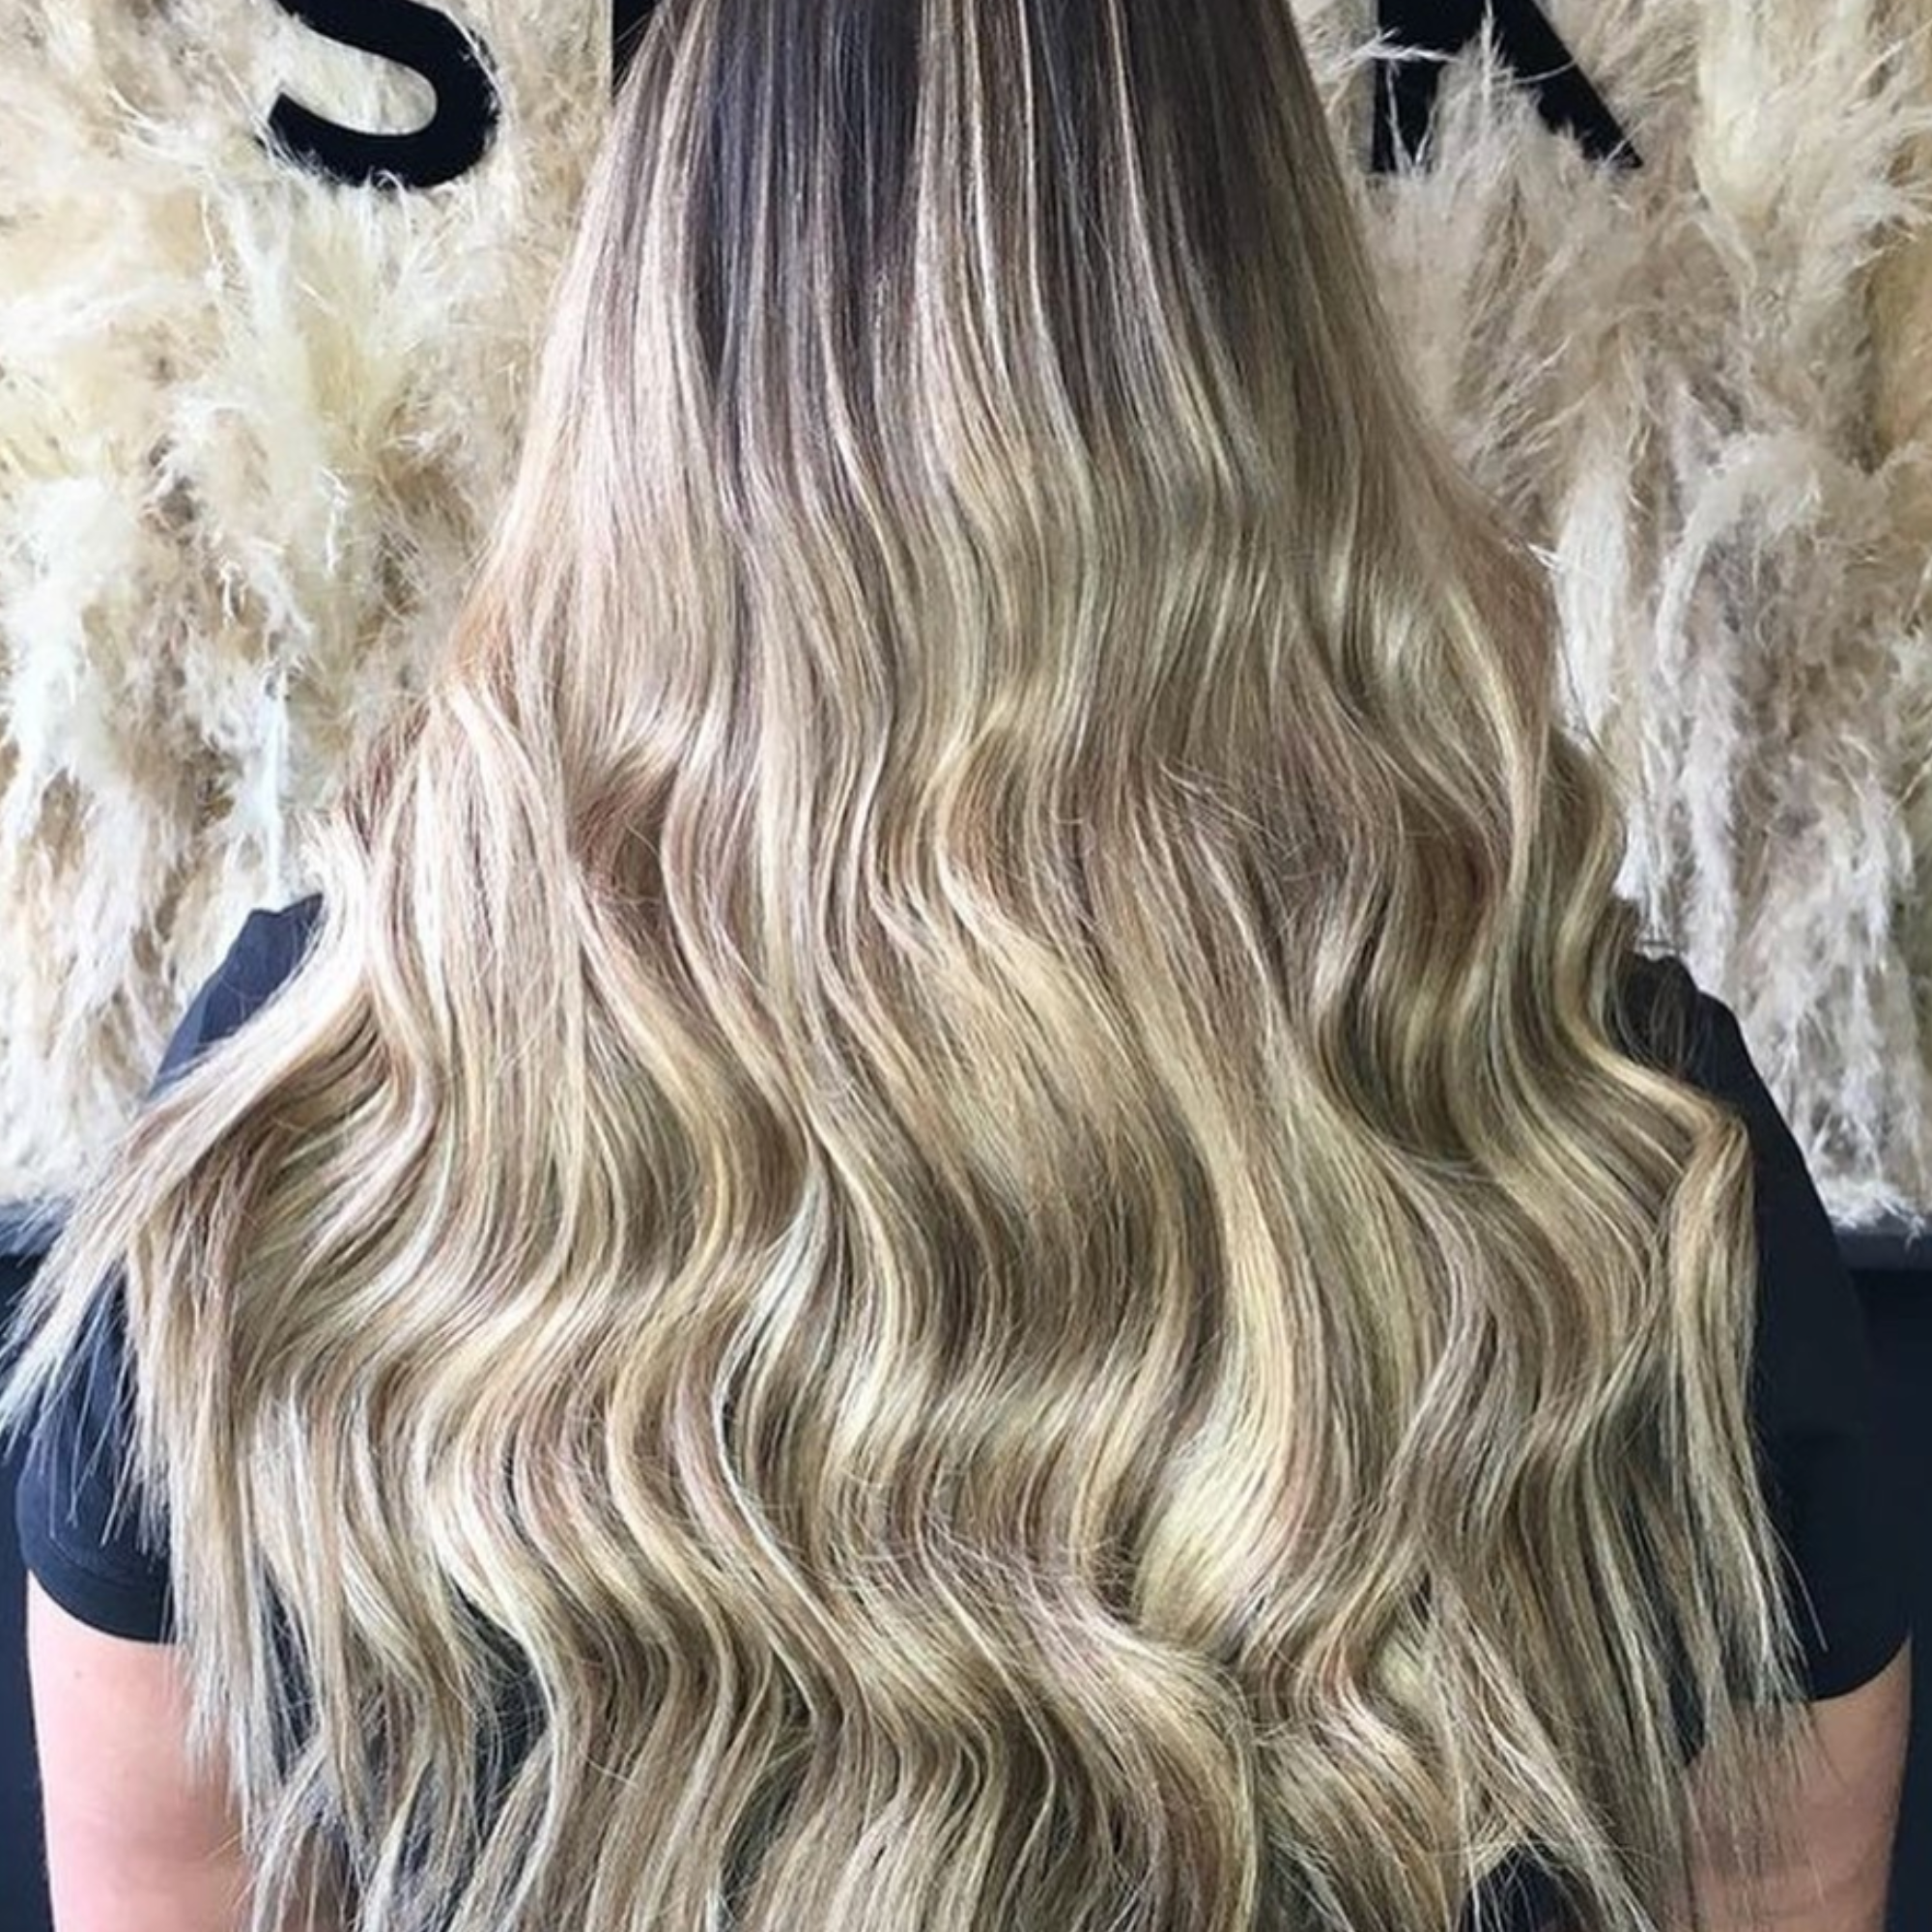 "hair rehab london 18" weft hair extensions shade swatch titled rooted coachella"